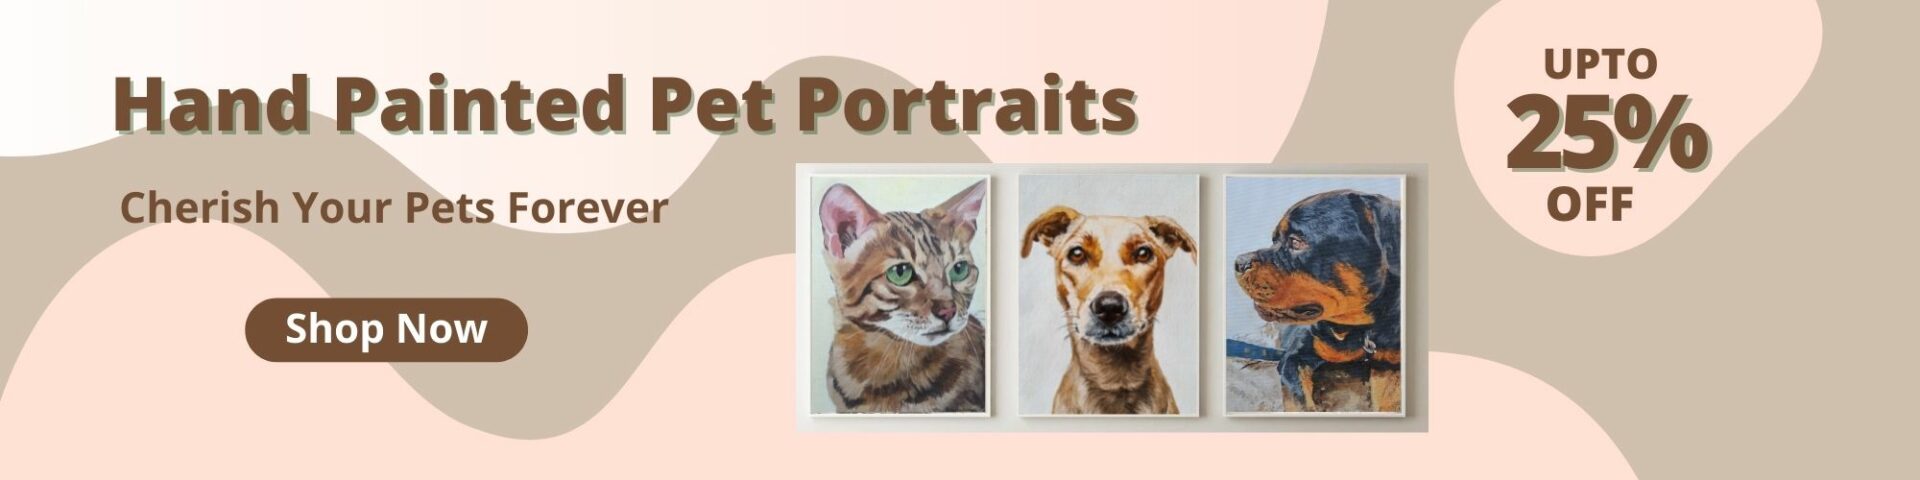 Hand Painted Pet Portraits - Upto 25%off